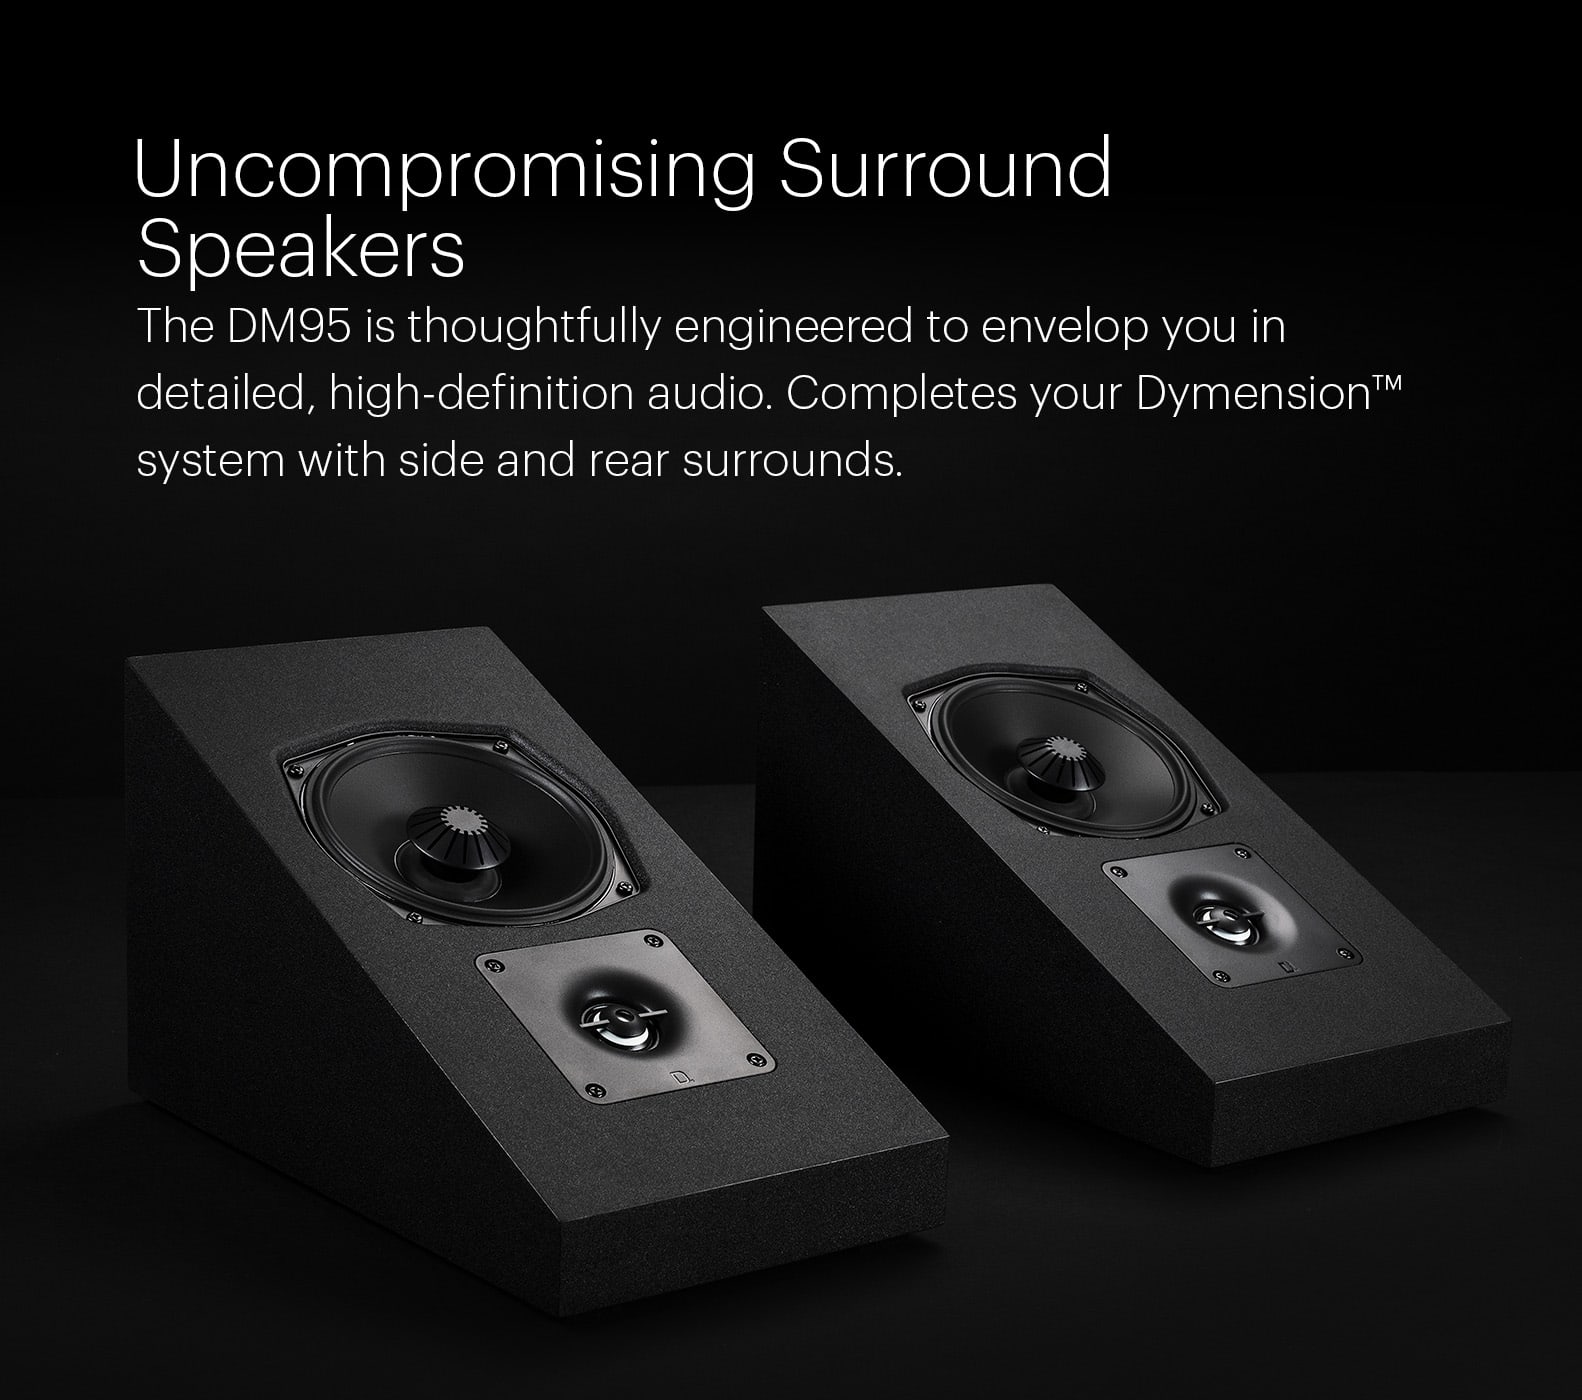 Dymension Surround Speakers